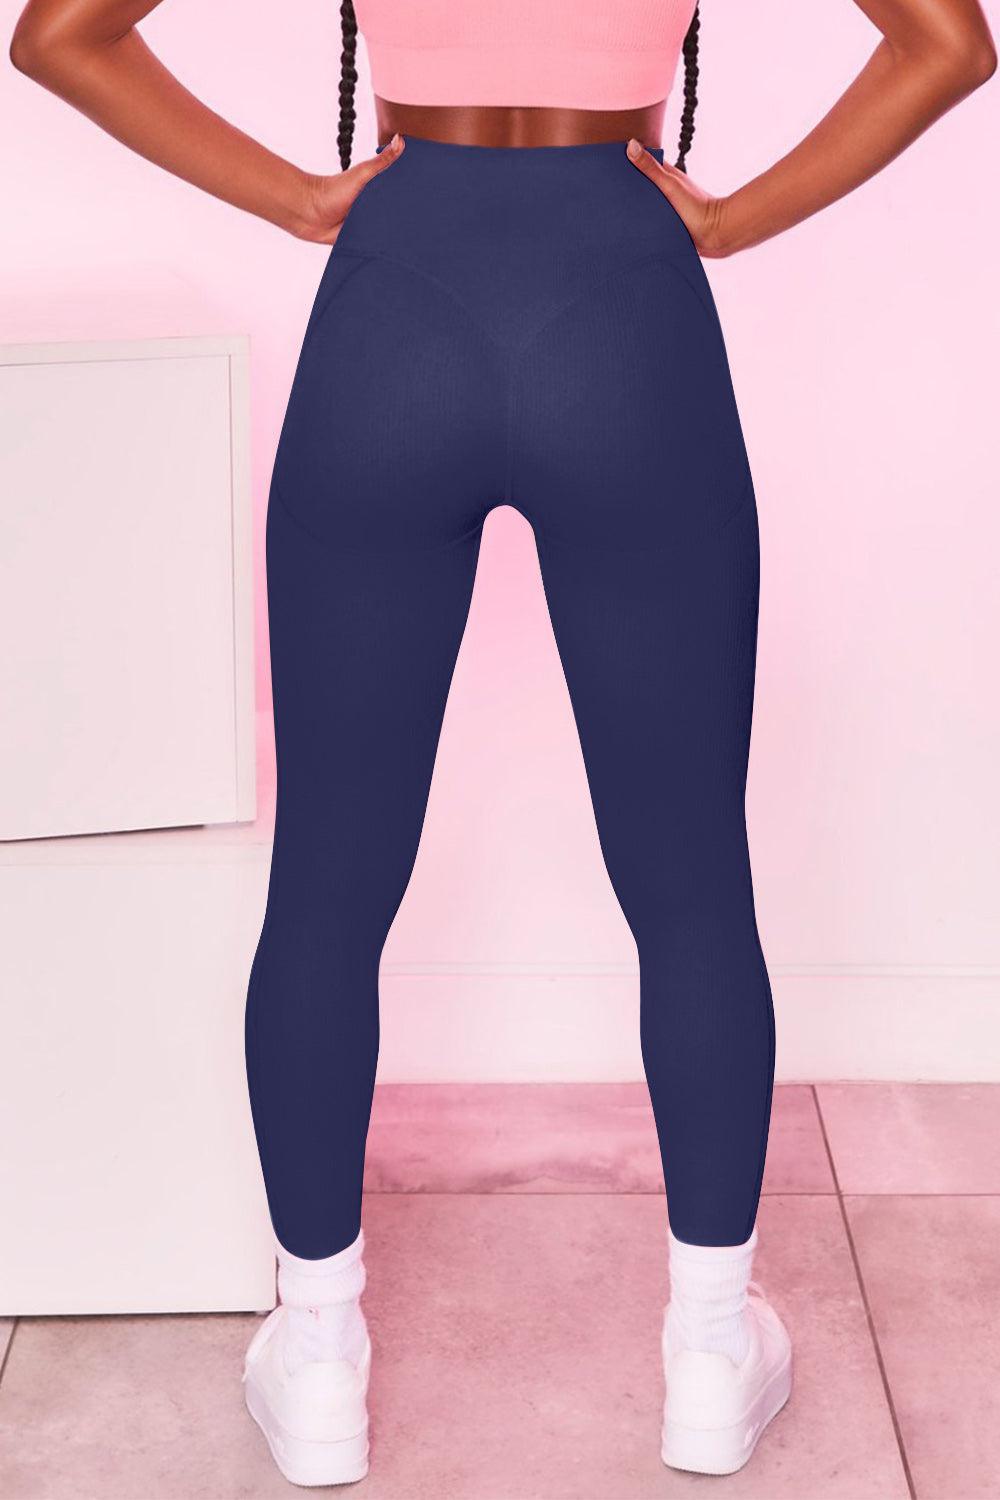 a woman in a pink top and blue leggings